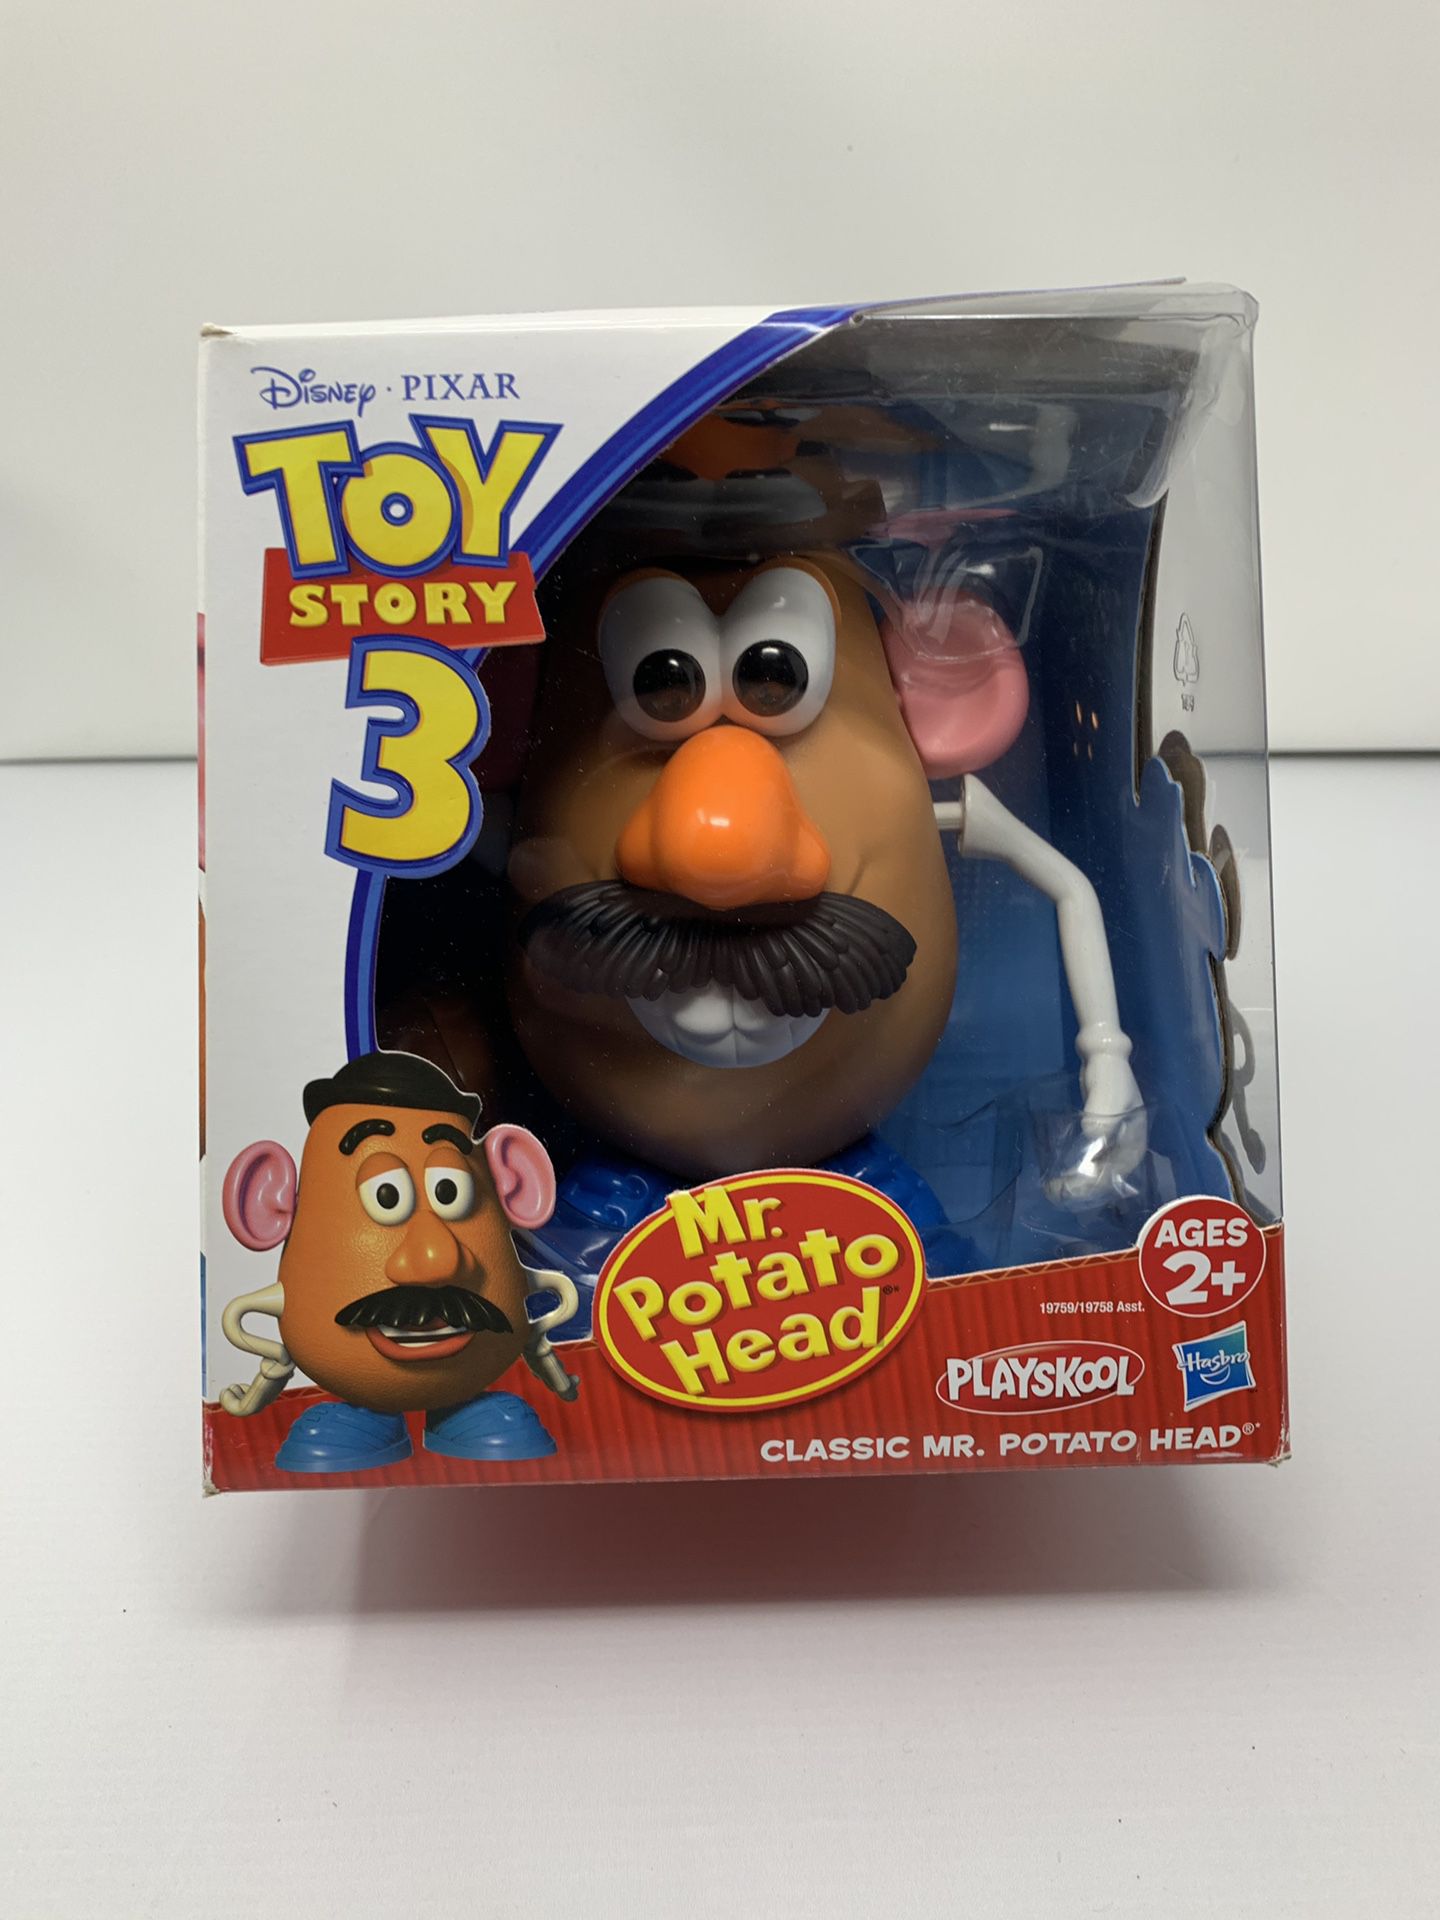 Mr. Potato Head from Disney and Pixar’s Toy Story 3 (Brand New)